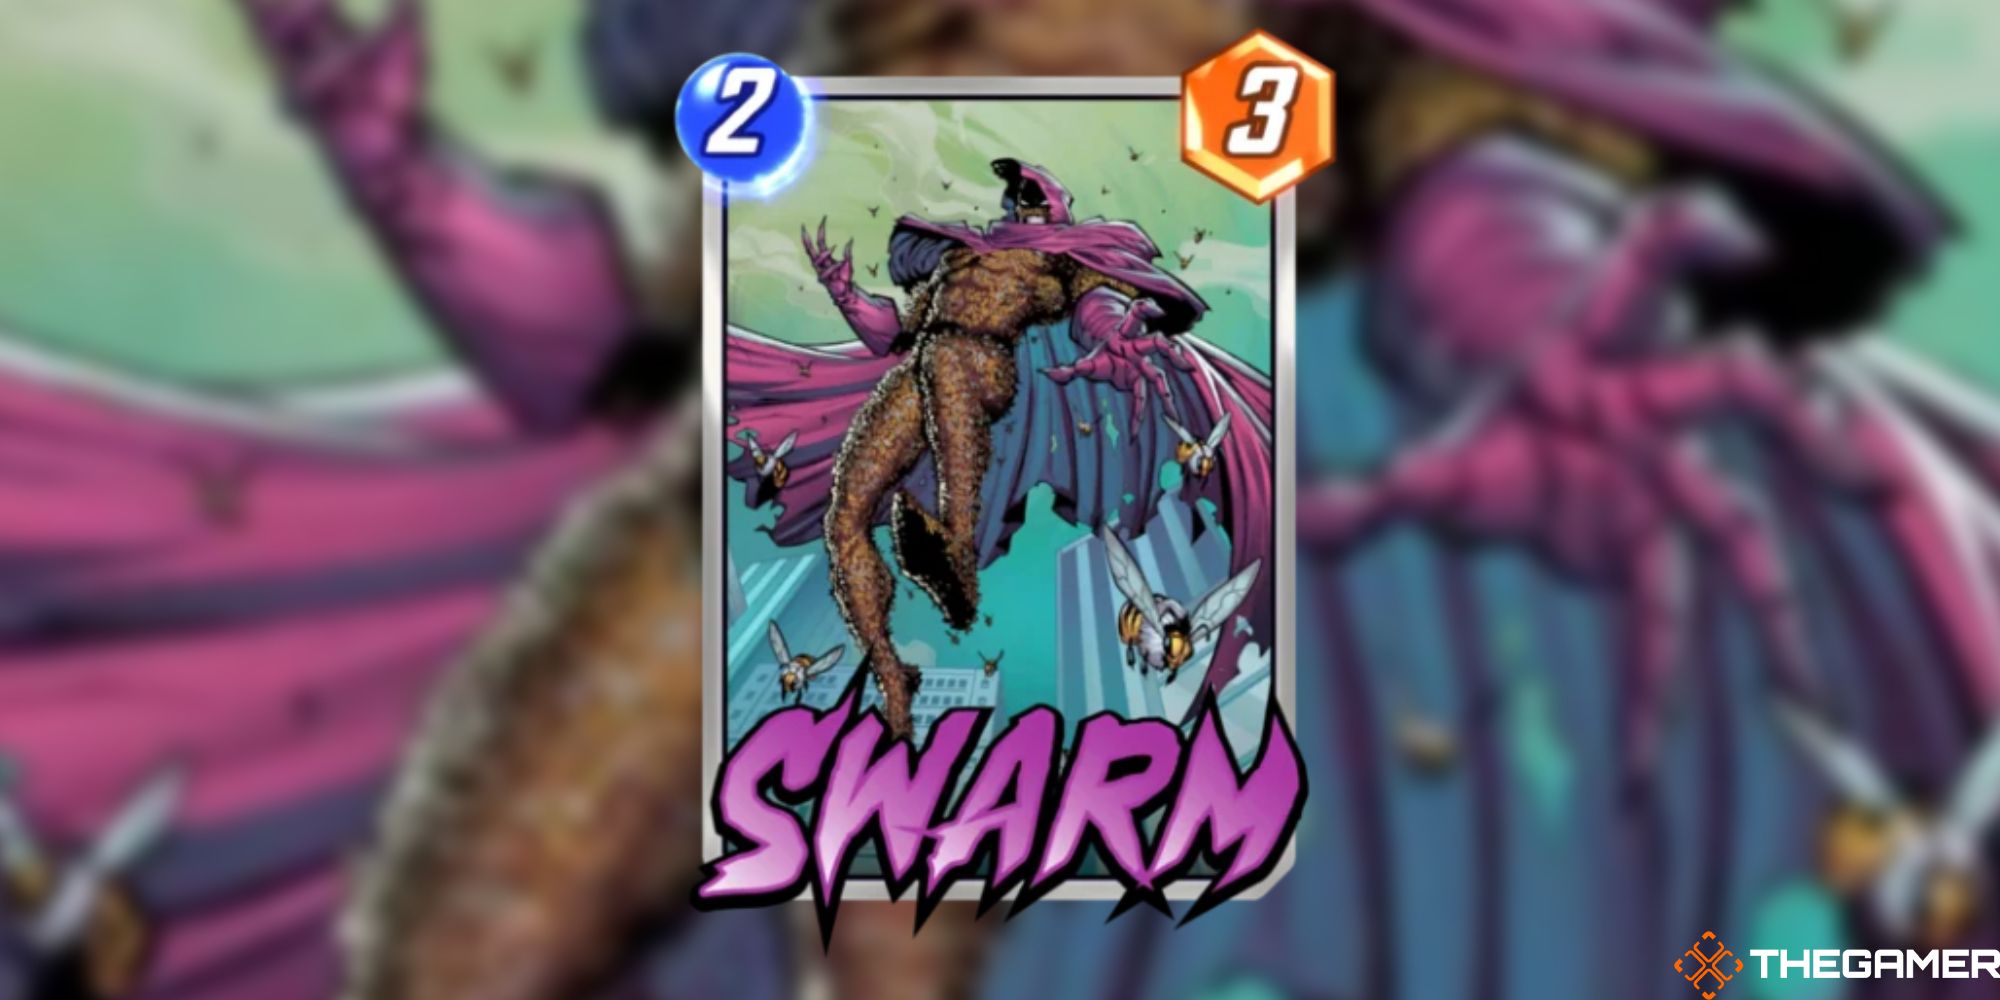 Marvel Snap - Swarm on a blurred background